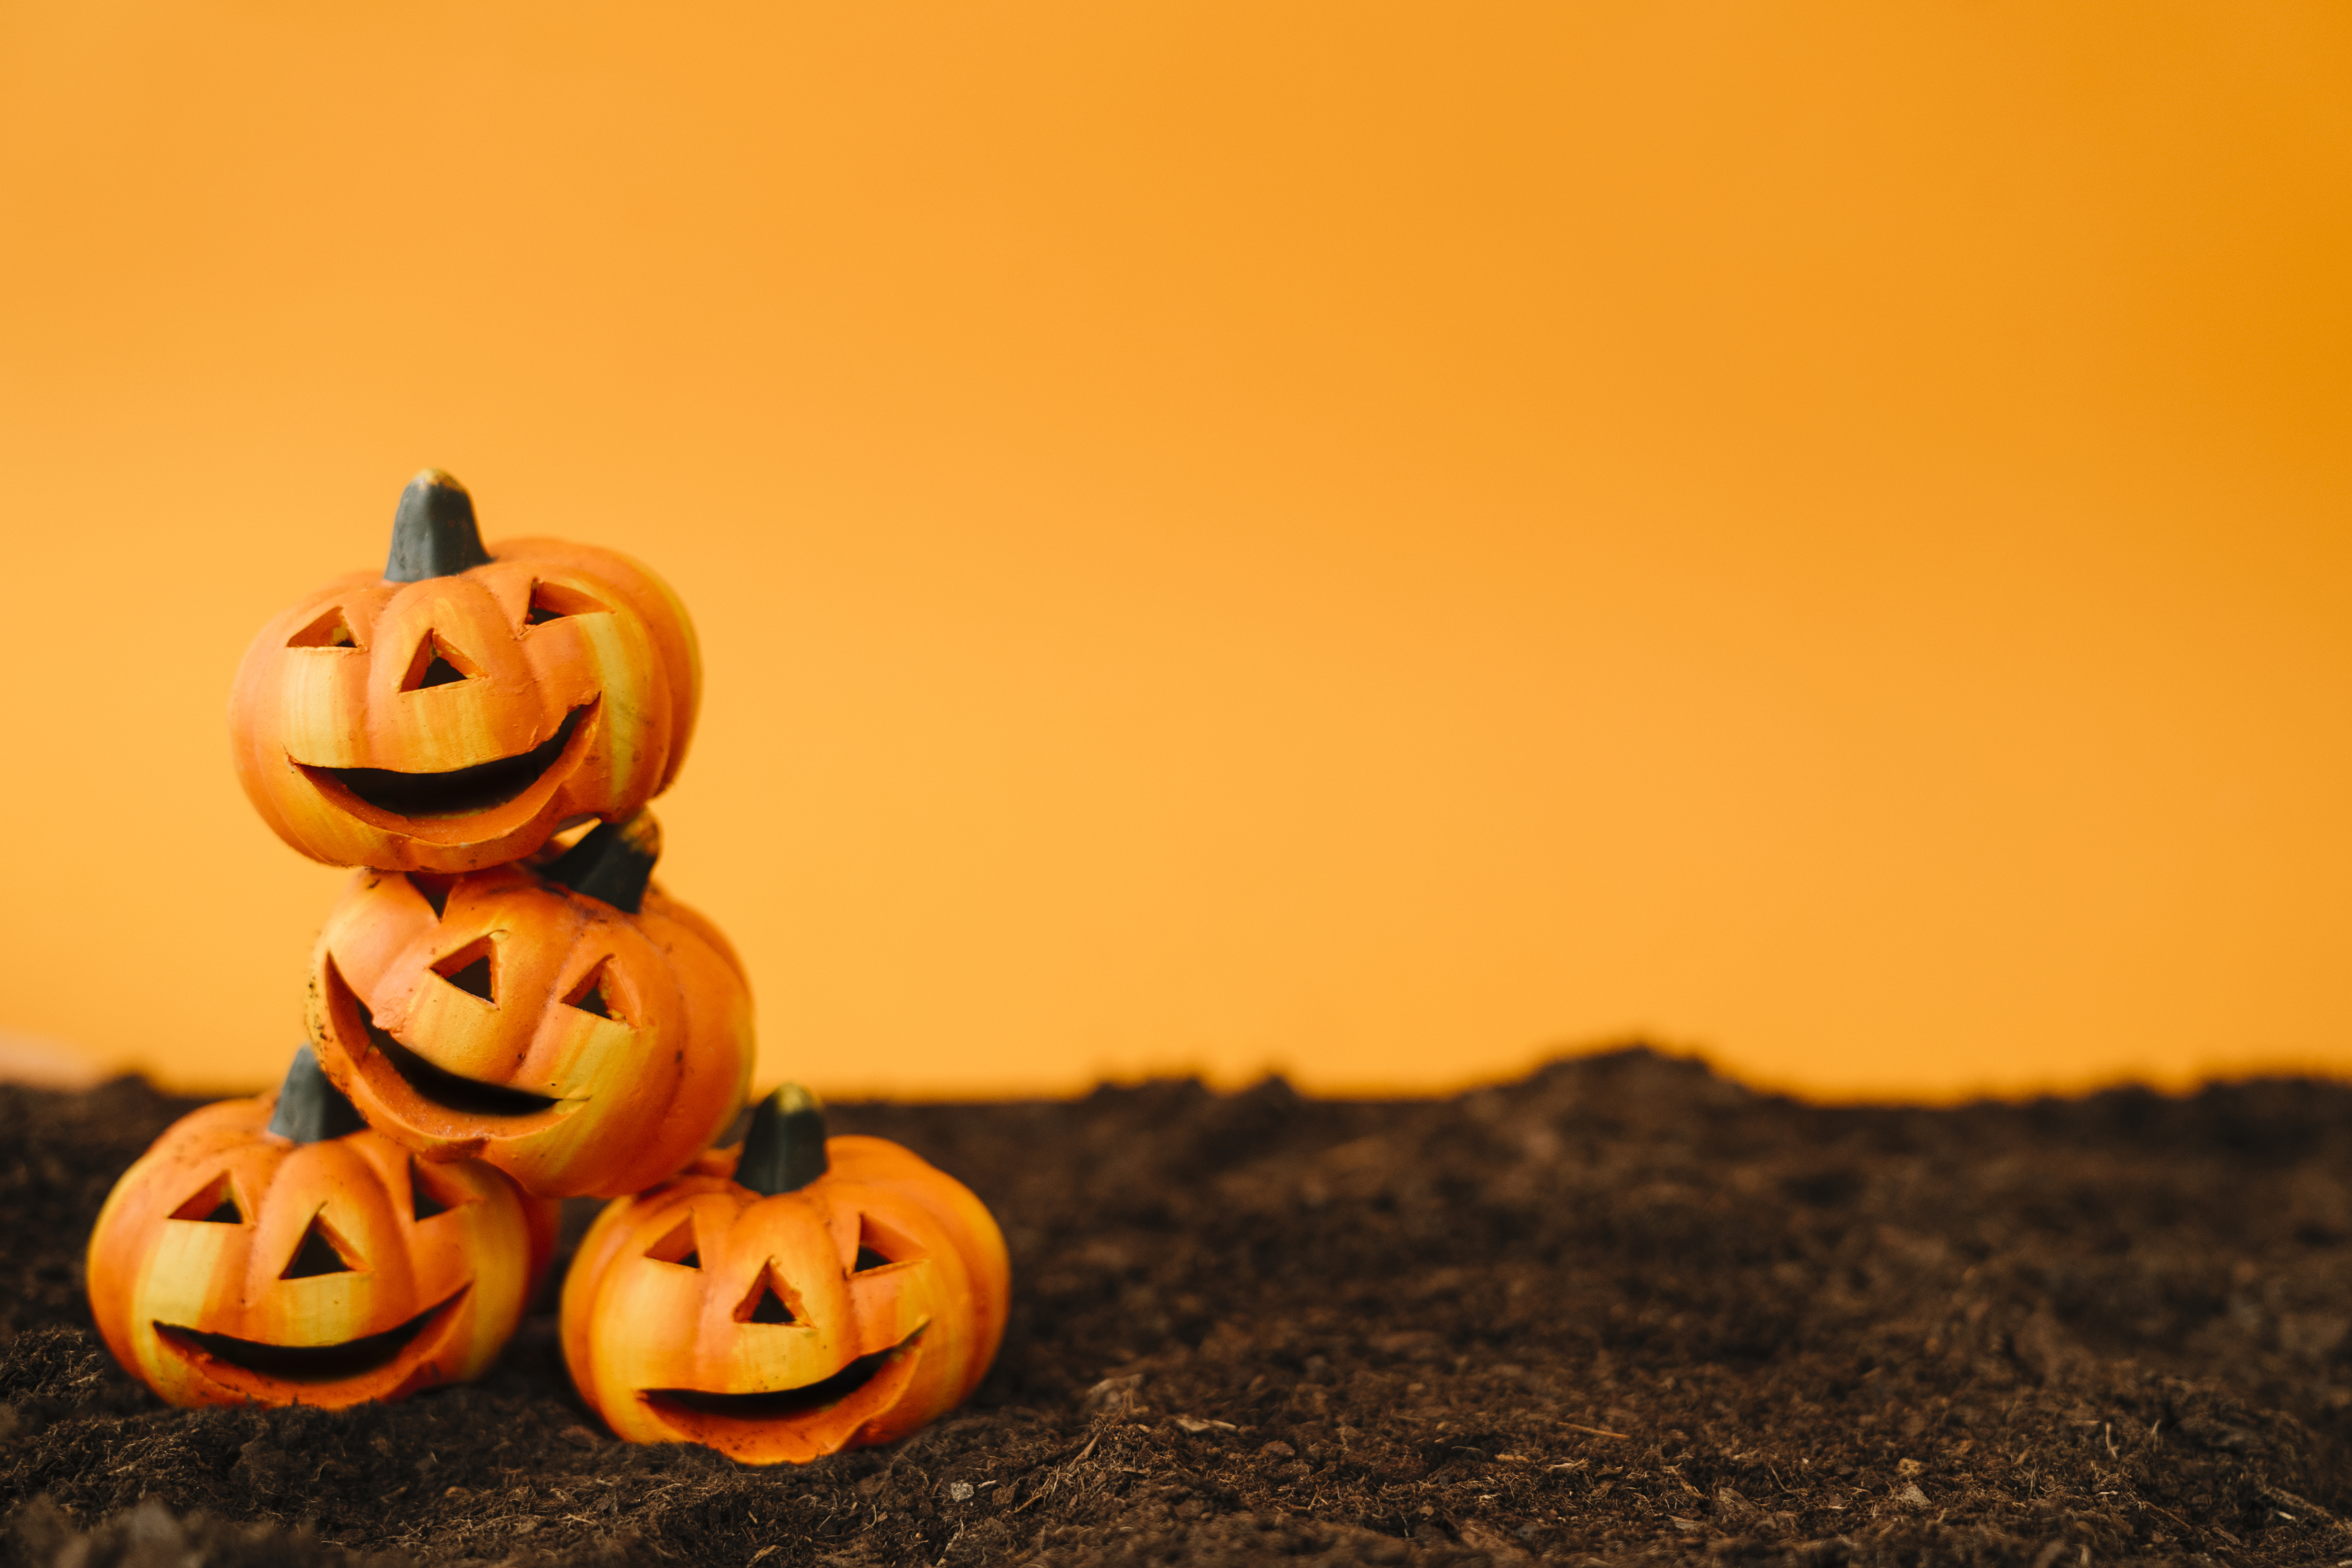 Stacked jack-o-lanterns sitting on the ground in front of an orange background.